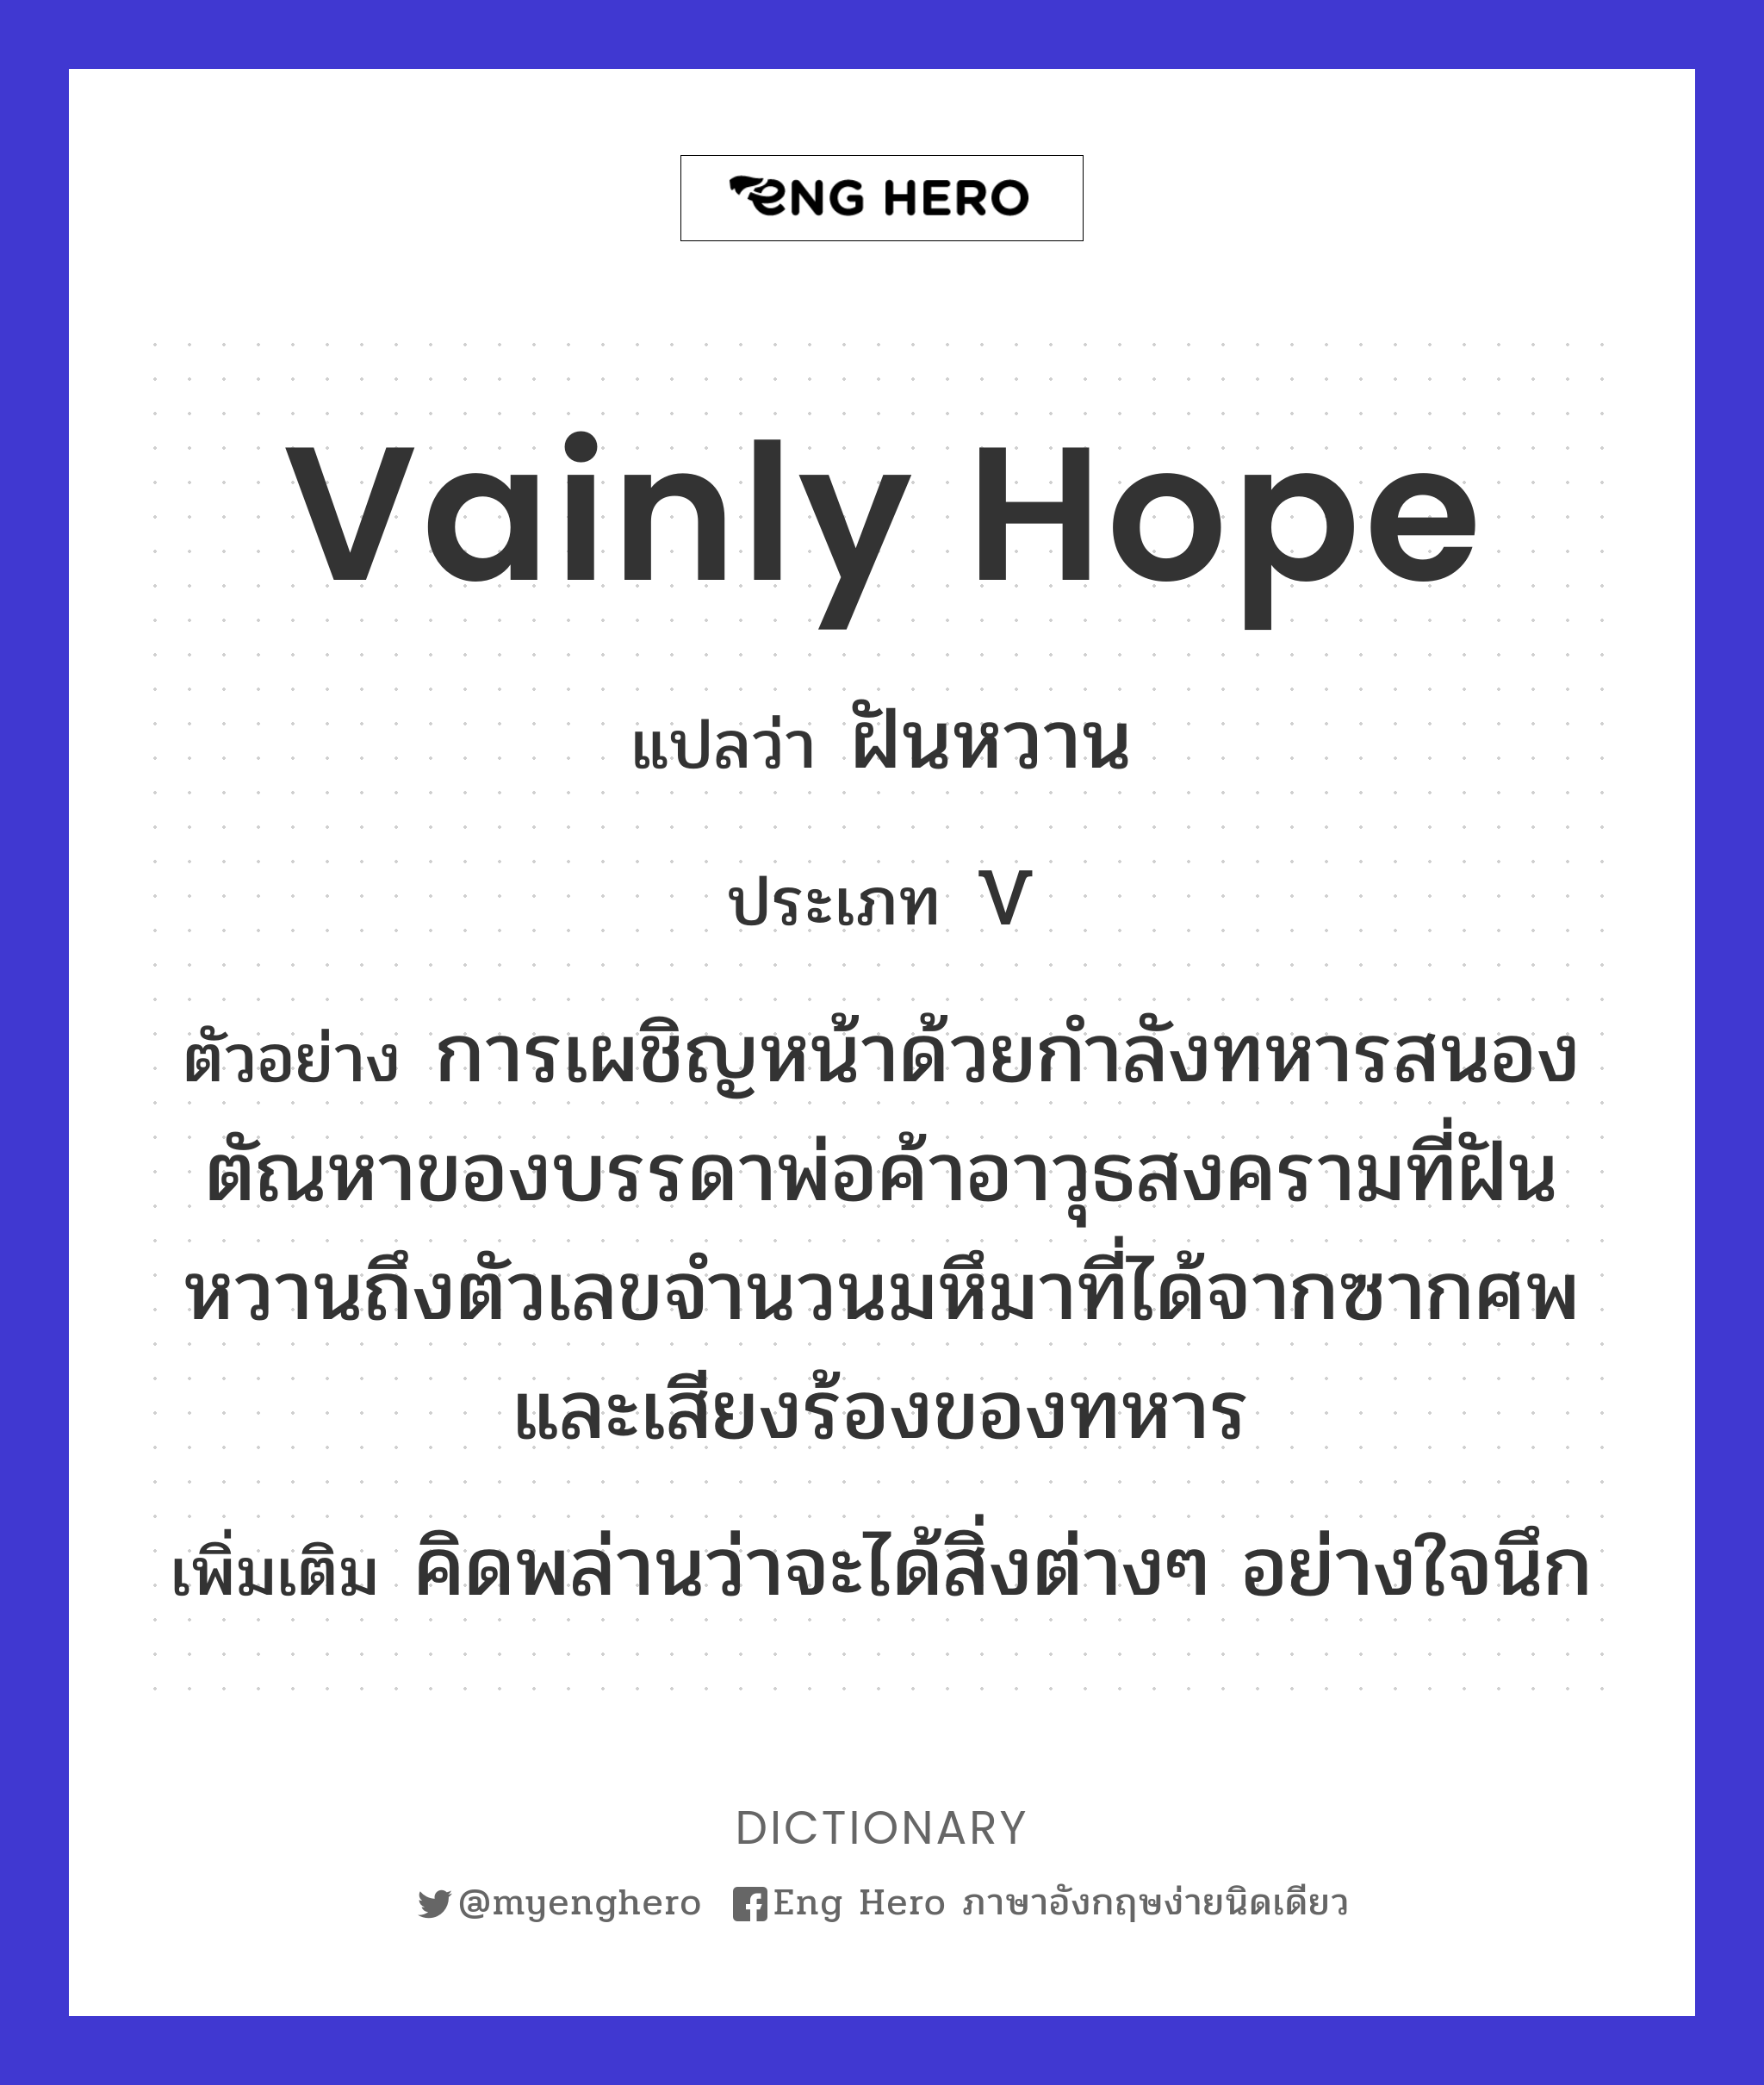 vainly hope